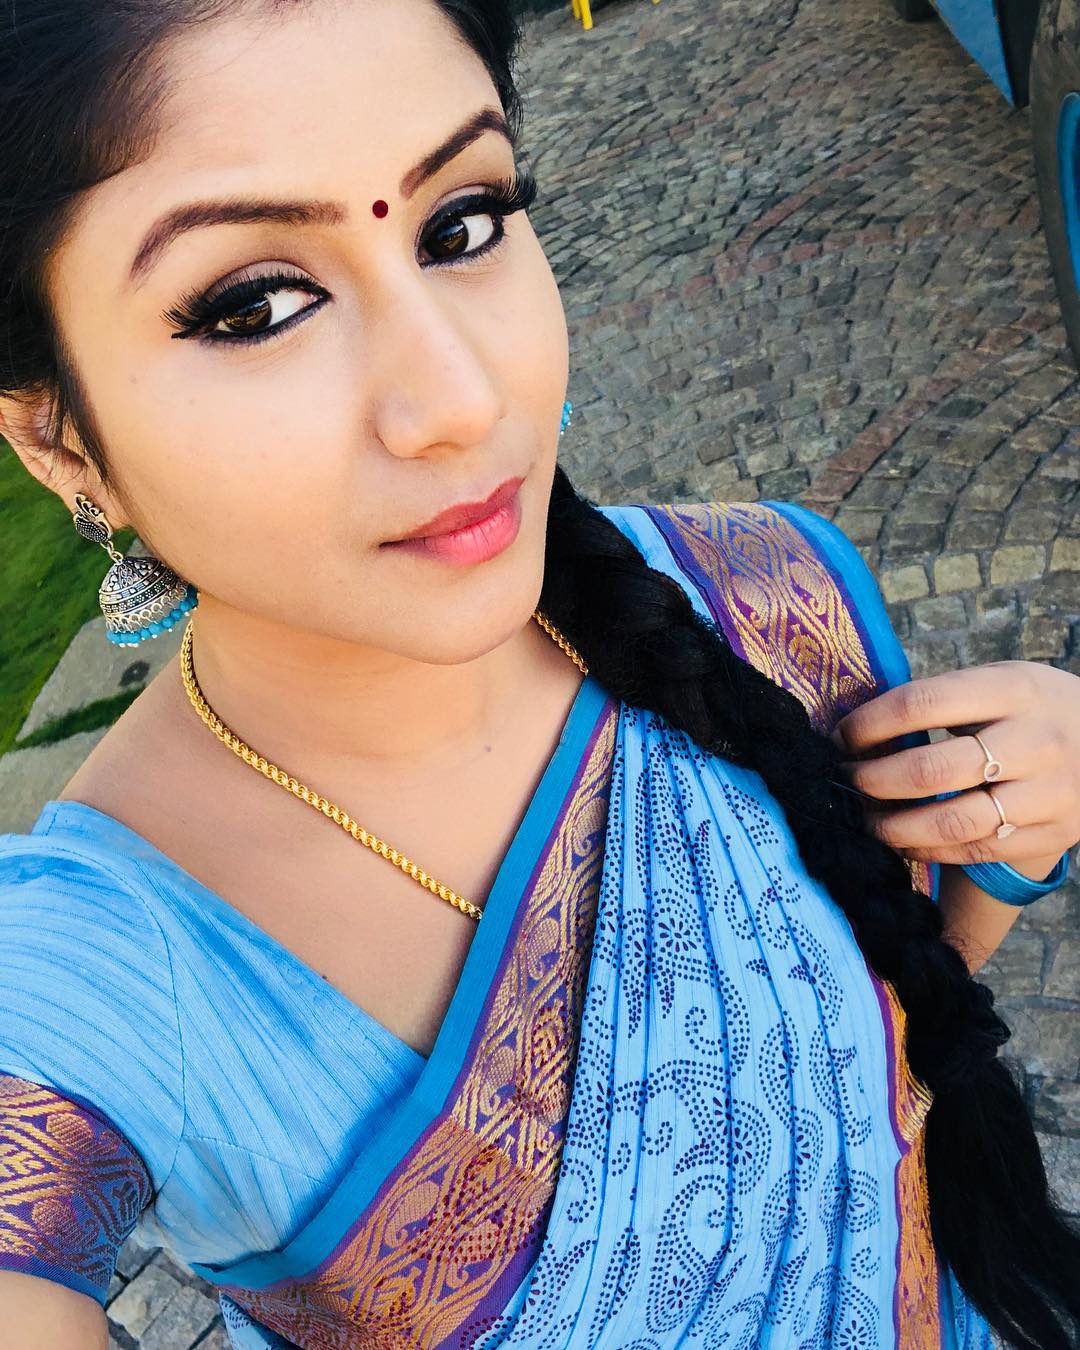 Alya Manasa Instagram image That Will Make You Fall For Her